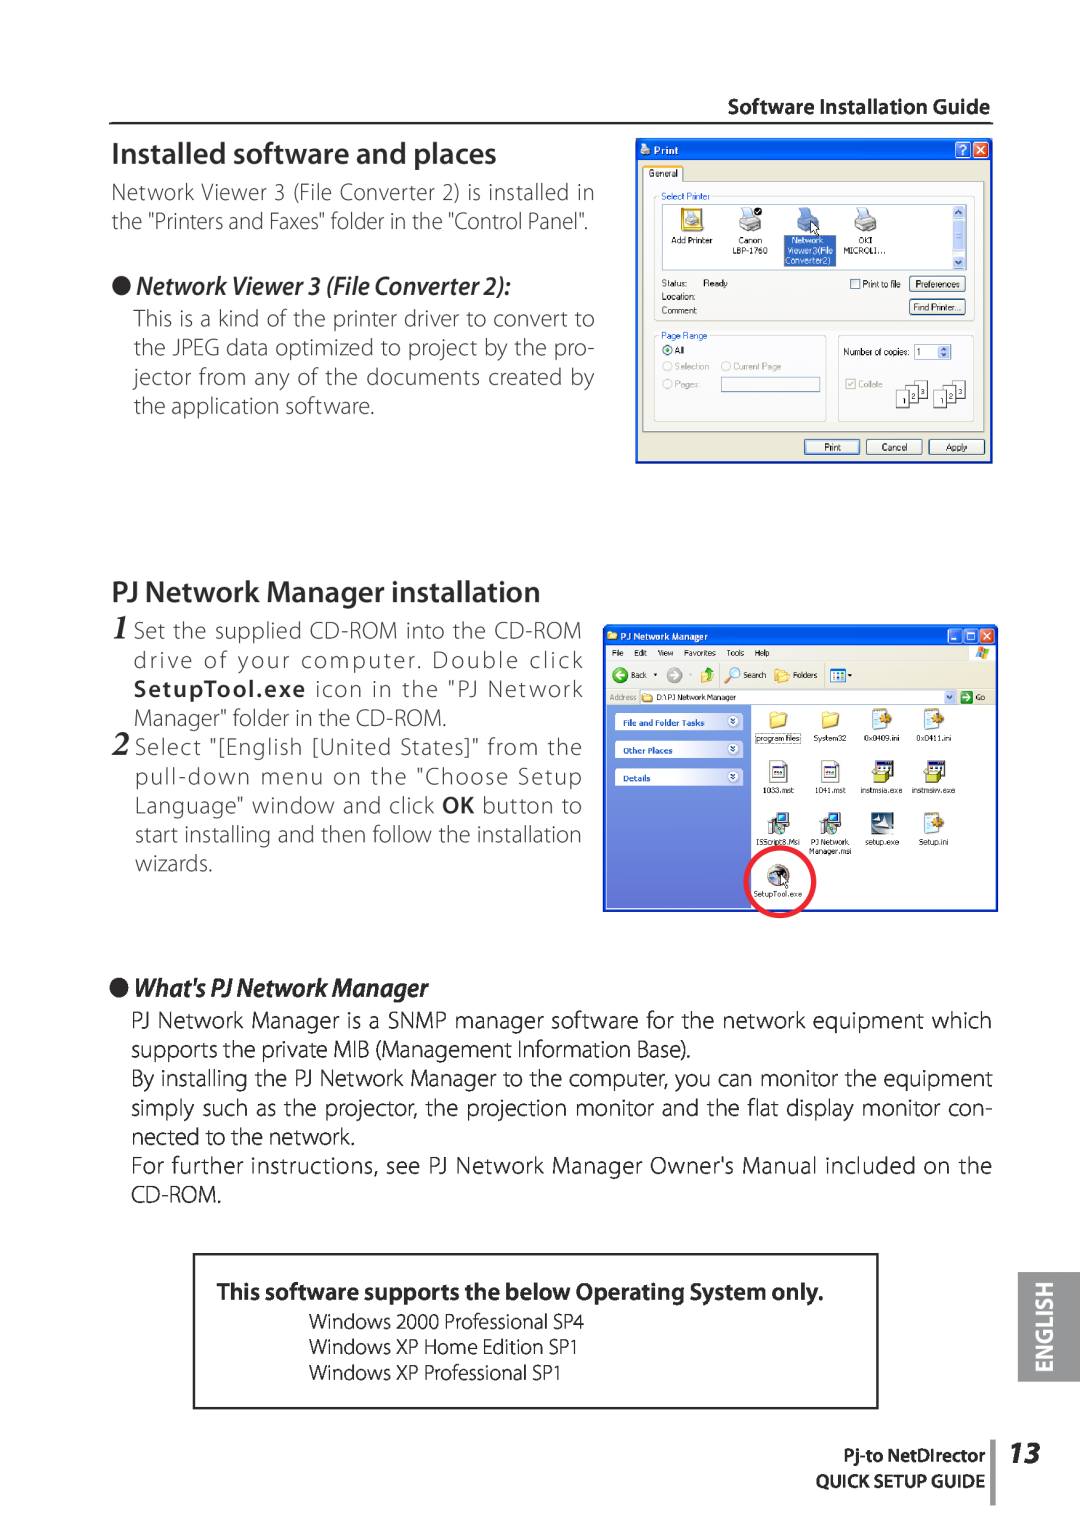 Eiki PJNET-30 setup guide Installed software and places, PJ Network Manager installation, Whats PJ Network Manager 